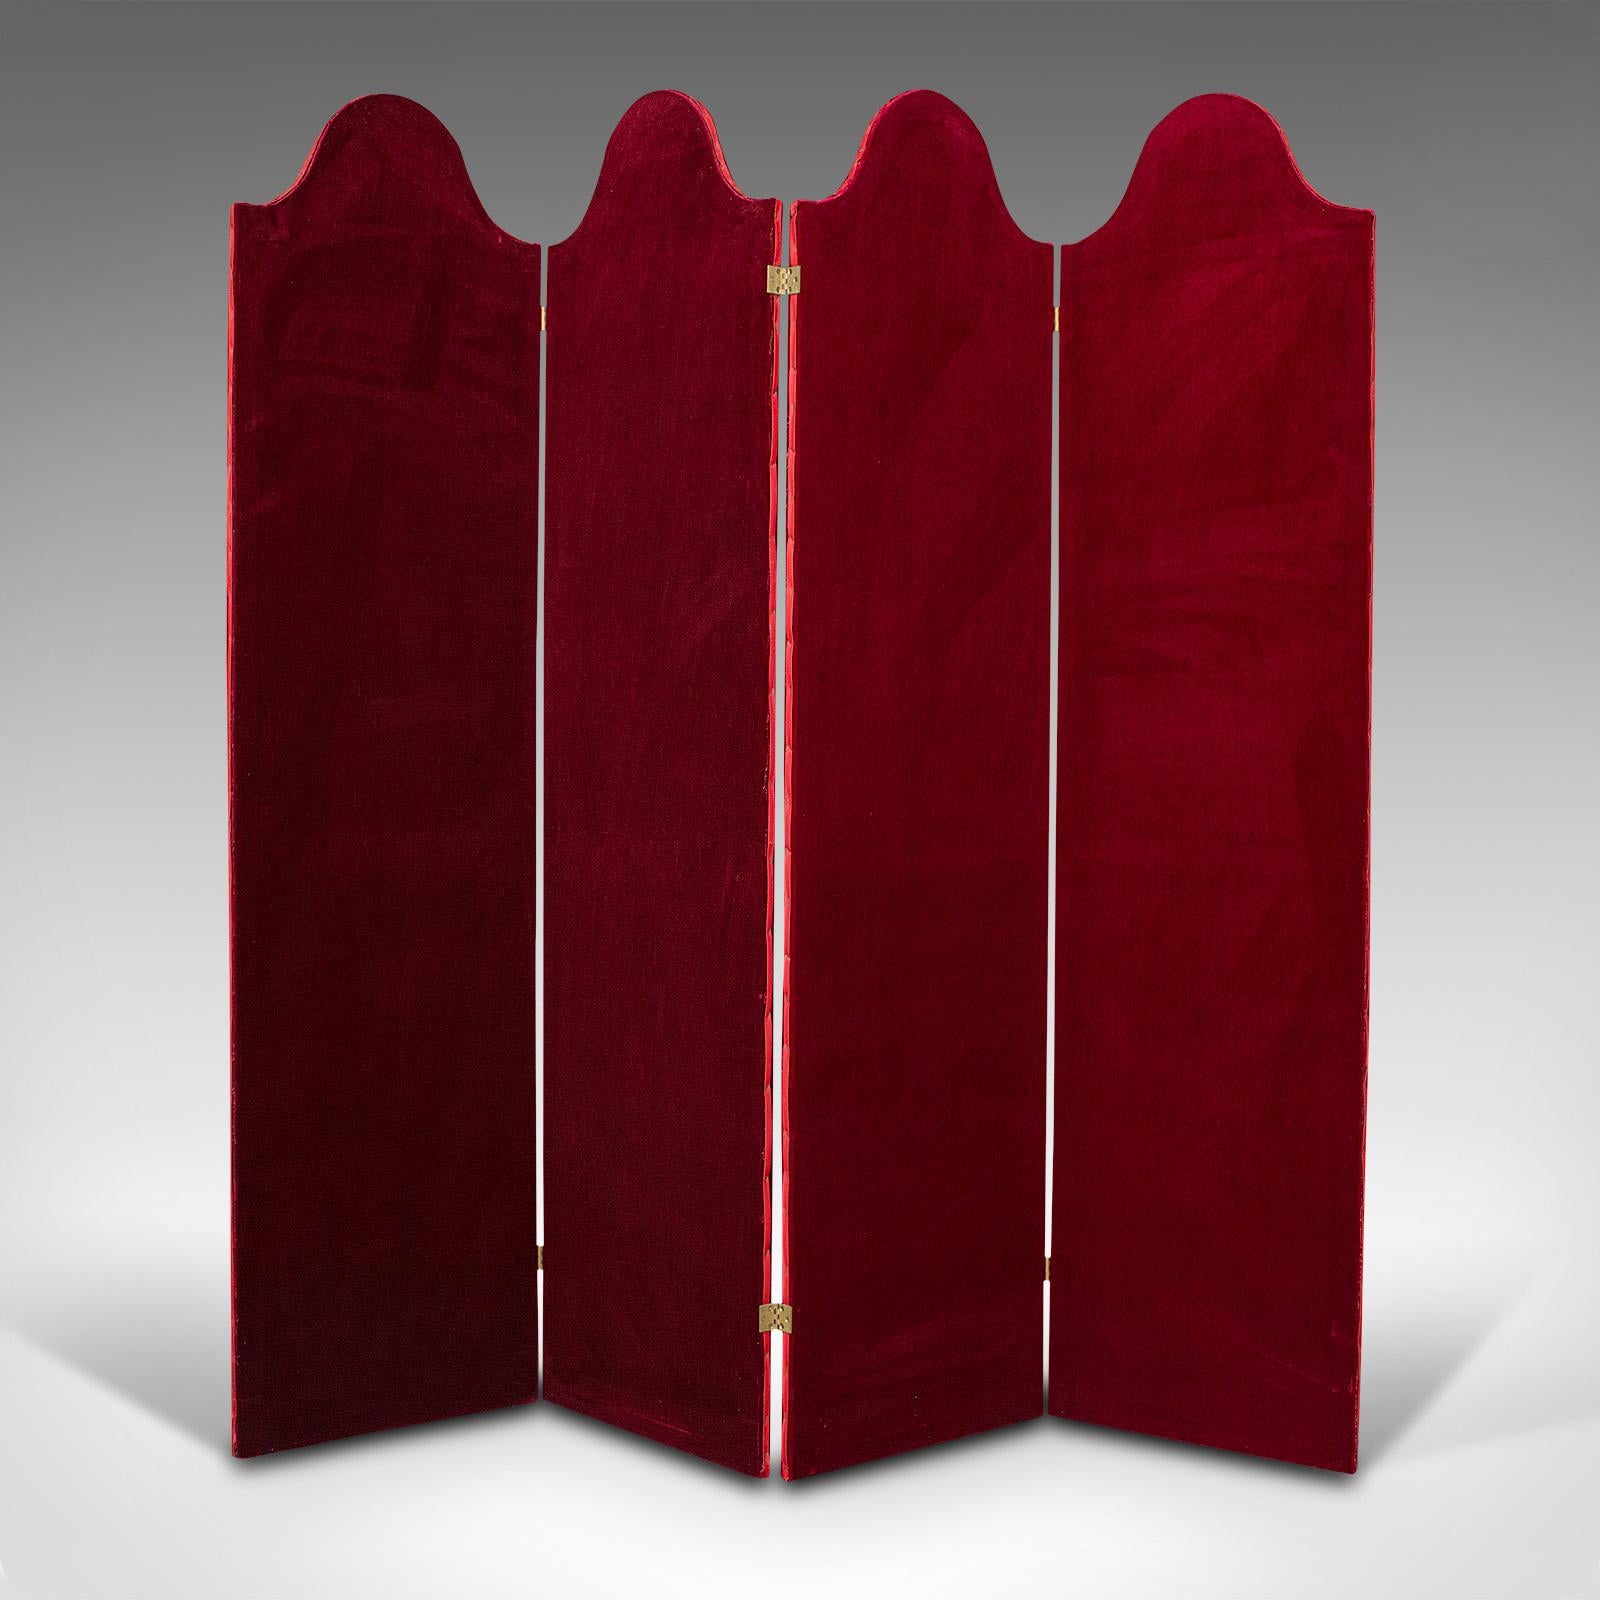 This is a tall antique room divider. An English, velvet boudoir or privacy screen, dating to the Edwardian period, circa 1910.

Dashing and inviting screen of generous proportion for the larger room
Displaying a desirable aged patina and in good